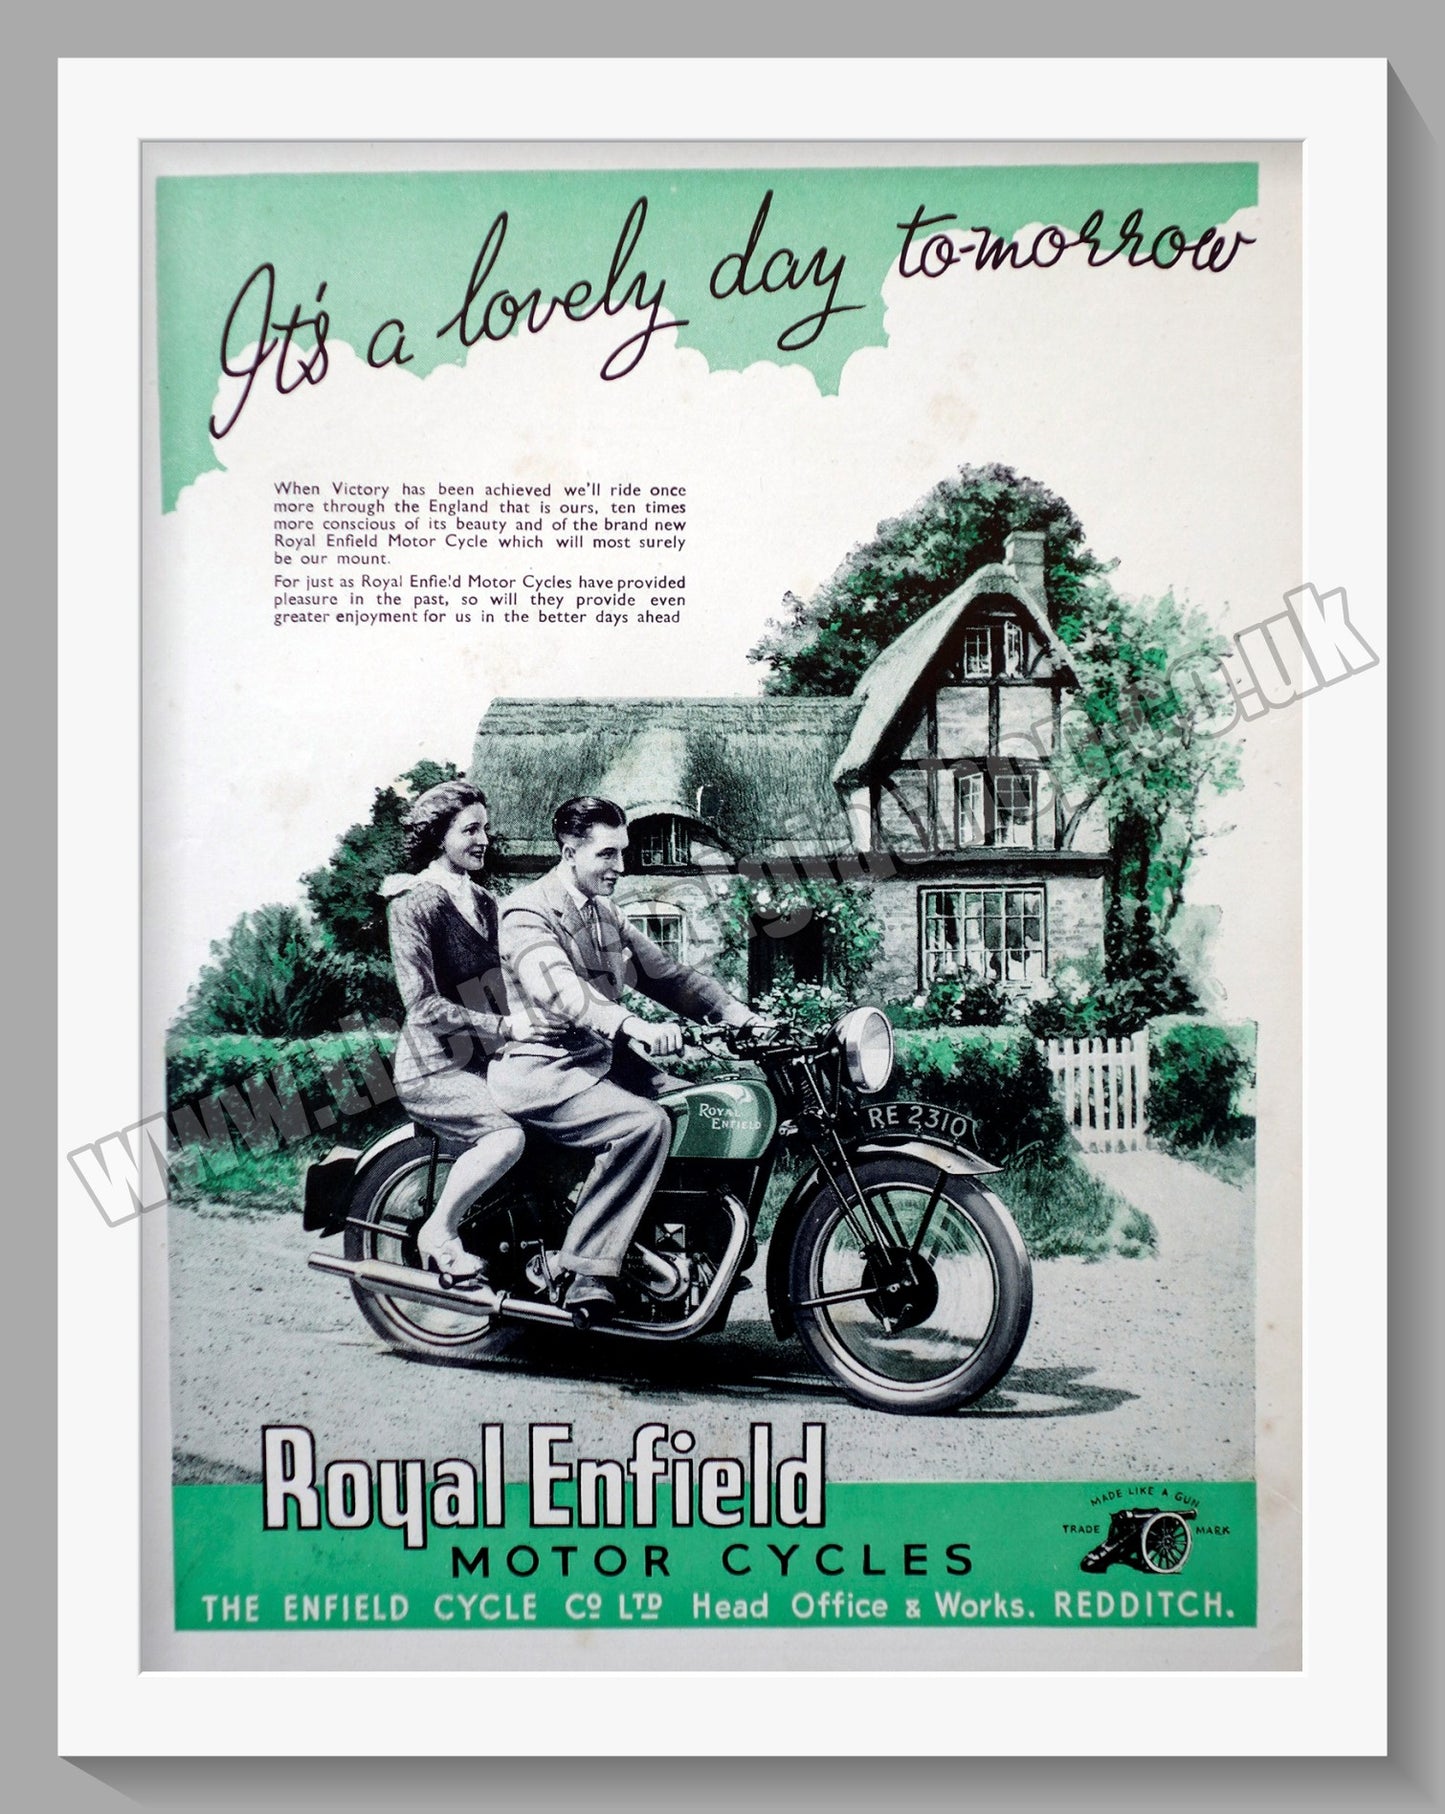 Royal Enfield Motorcycles. It's a Lovely Day Tomorrow . Original Advert 1941 (ref AD57075)